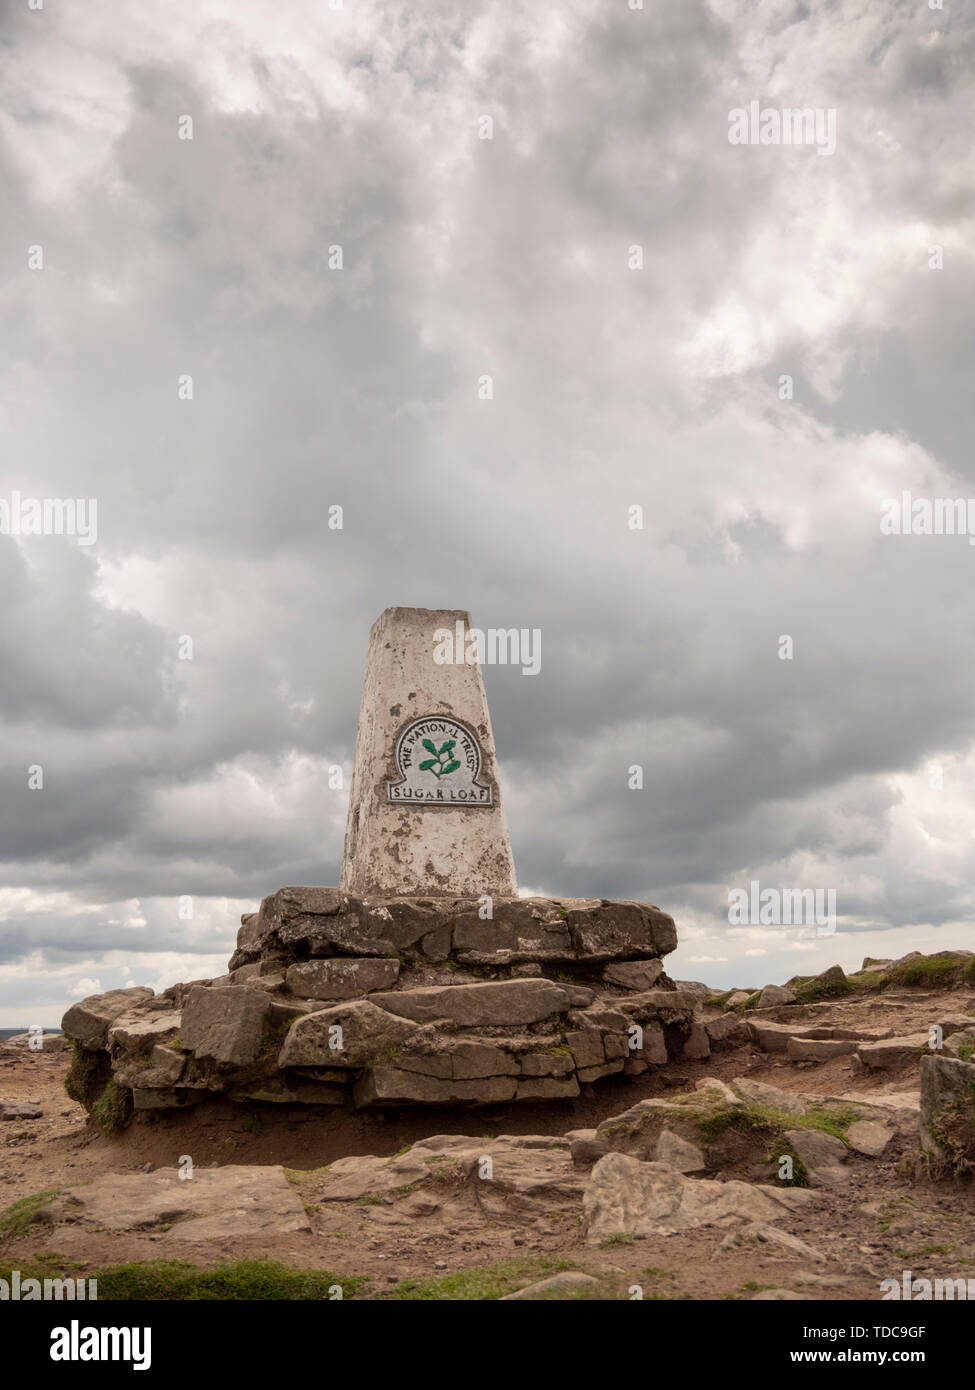 The trig or trigonometry sign at the summit of Sugar Loaf mountain Brecon Beacons National Park Wales UK Stock Photo